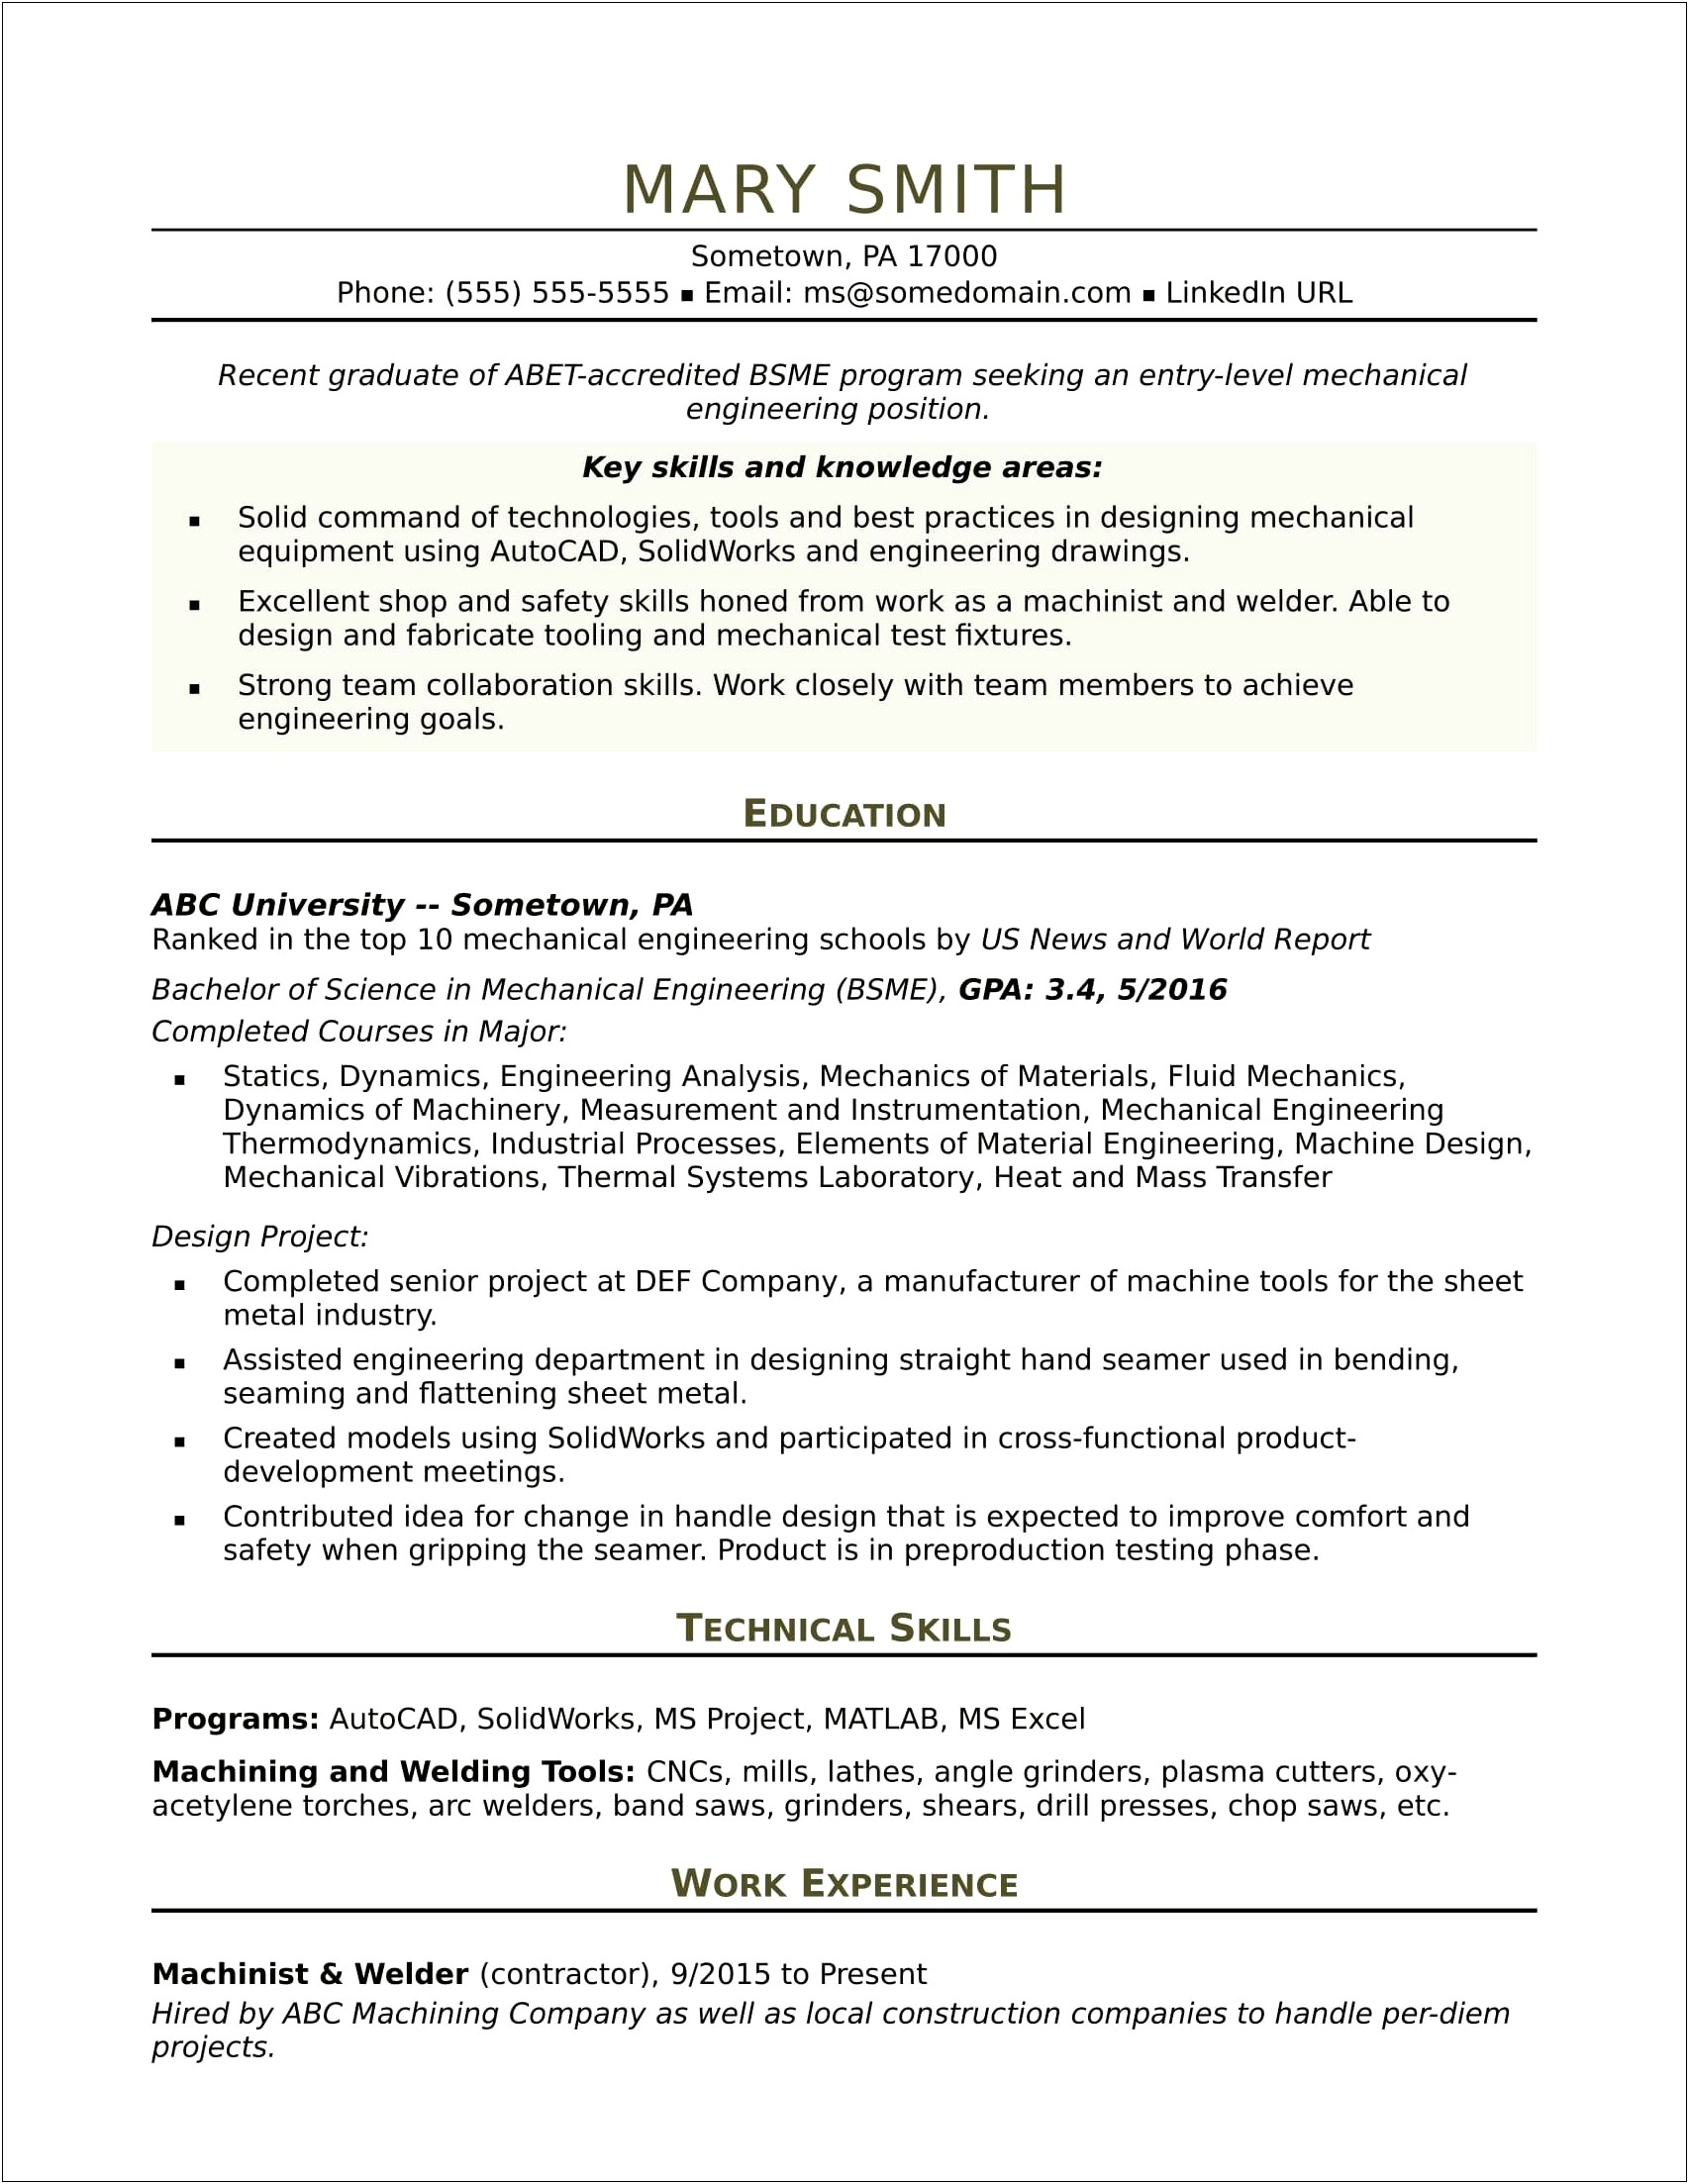 Resume Summary Example For A Mechanical Engineer